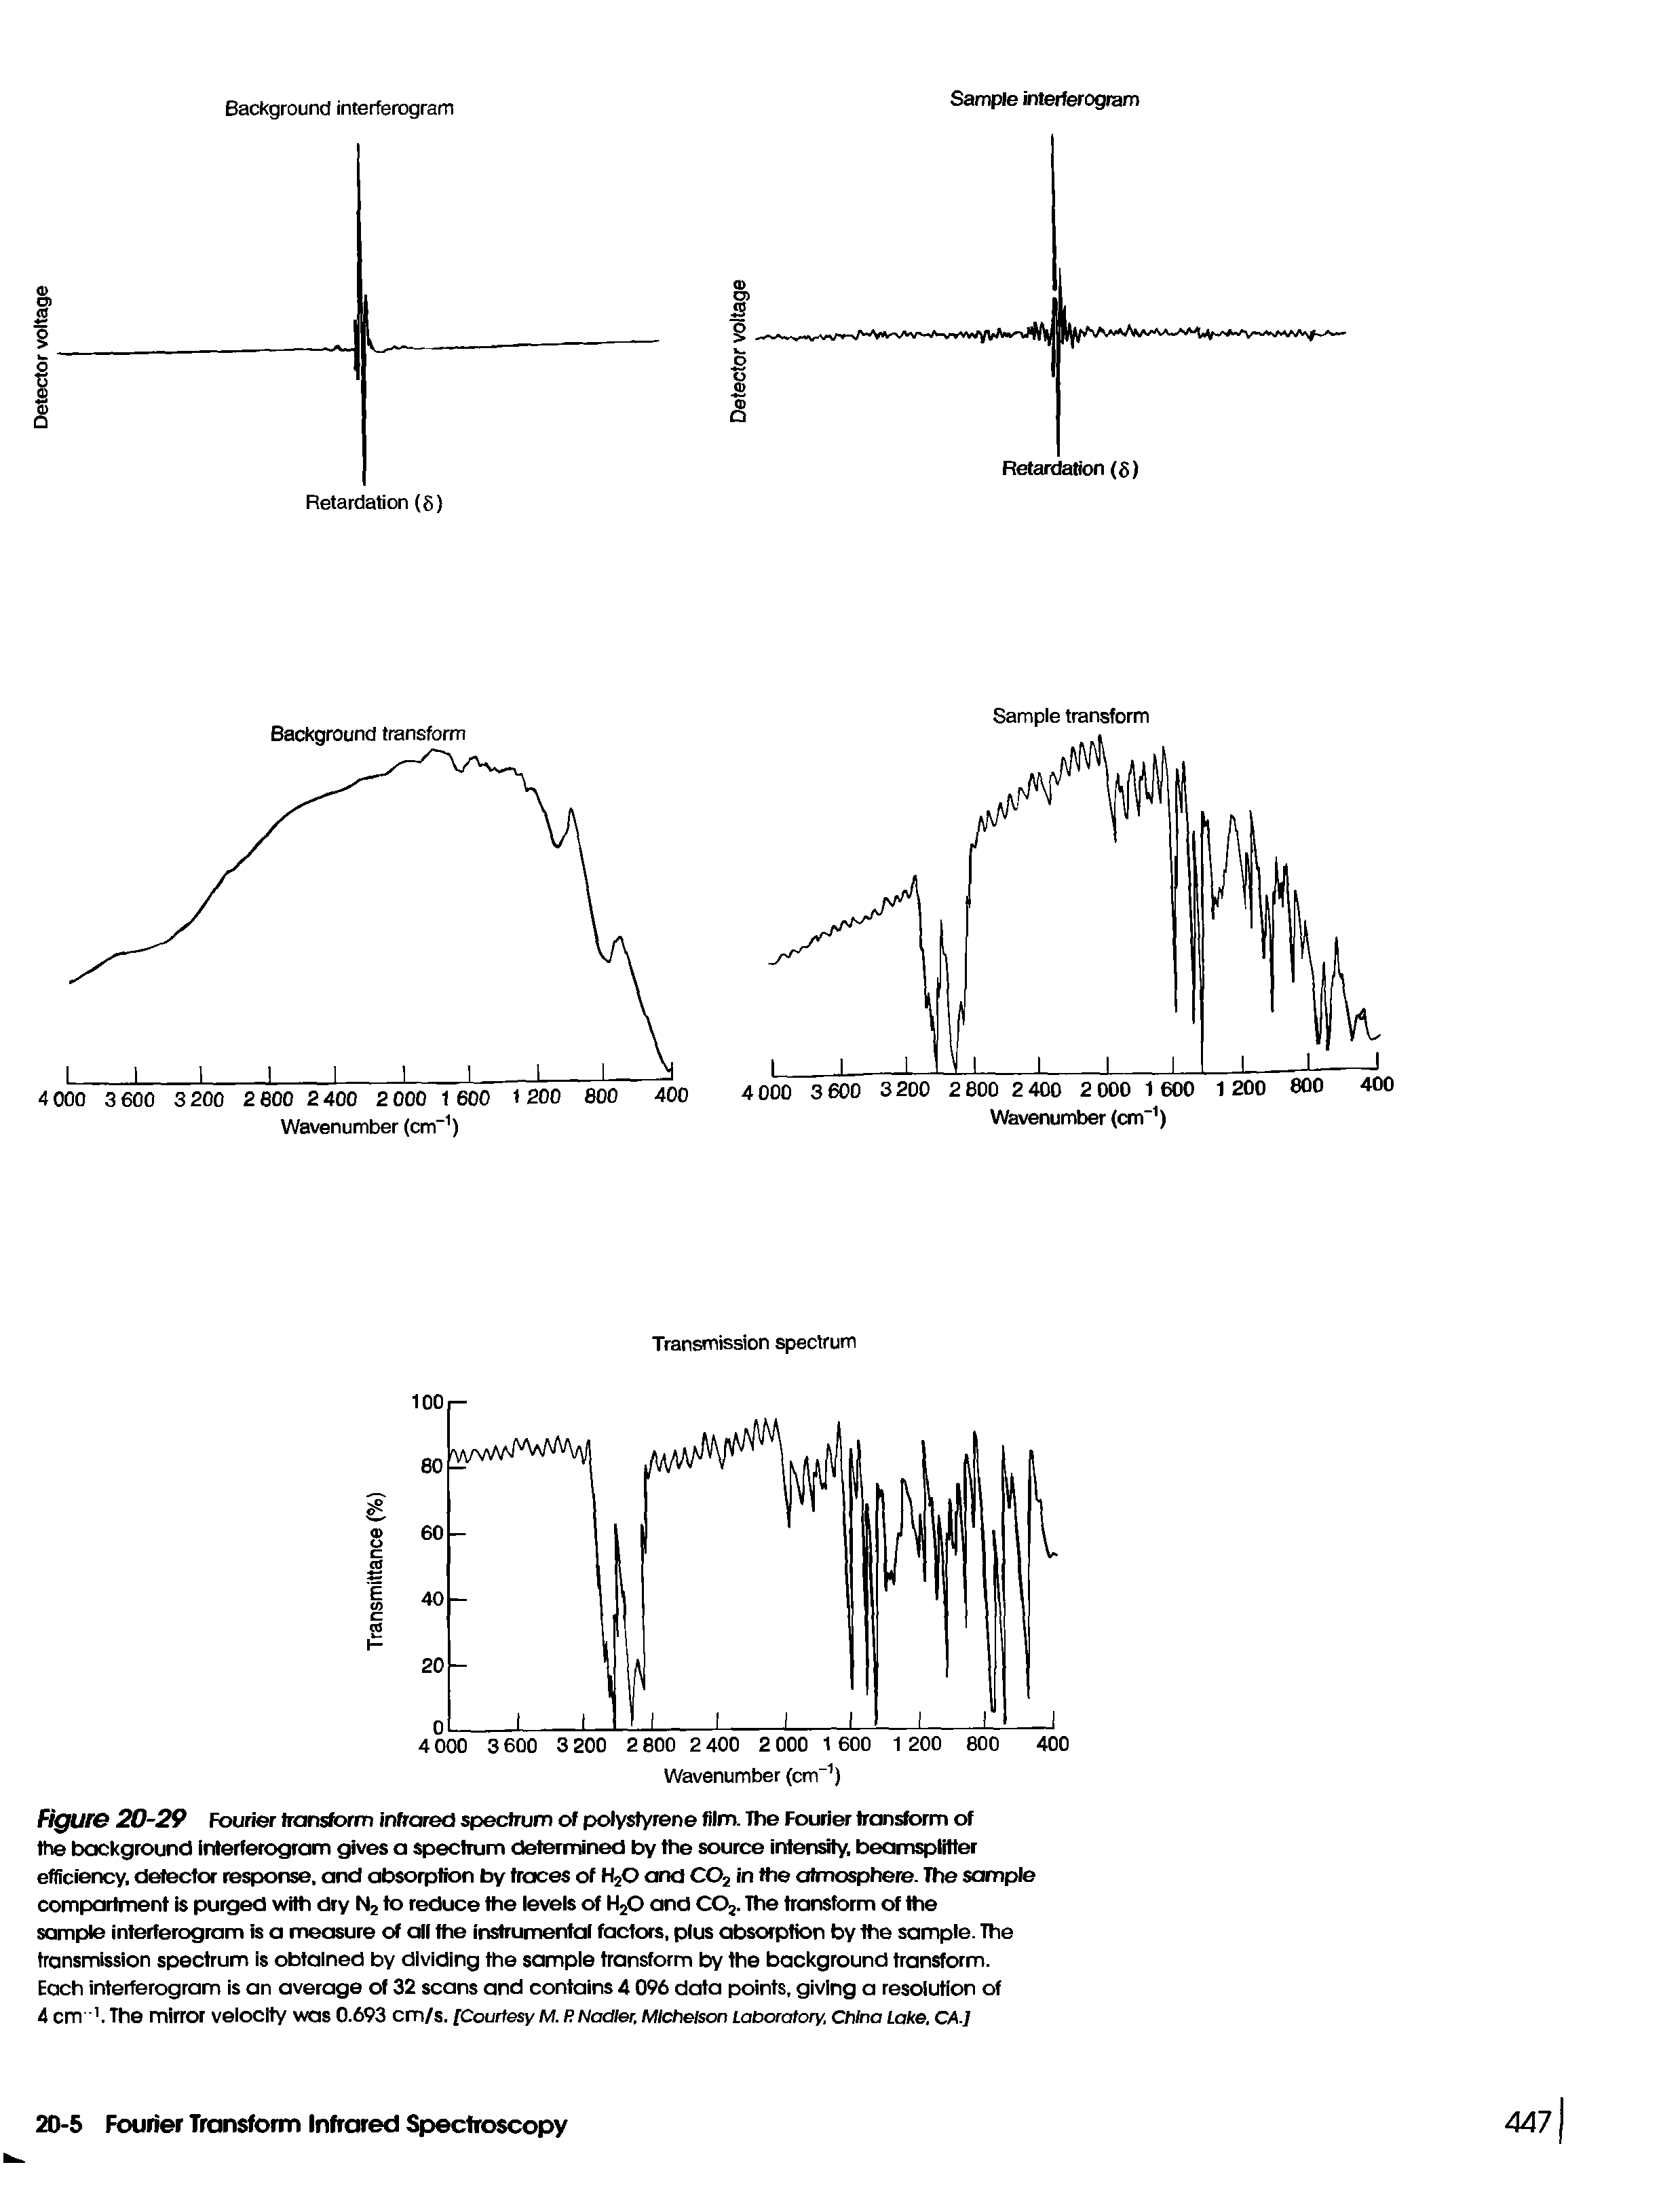 Figure 20-29 Fourier transform infrared spectrum of polystyrene film. The Fourier transform of the background interferogram gives a spectrum determined by the source intensity, beamsplitter efficiency, detector response, and absorption by traces of H20 and C02 in the atmosphere. The sample compartment is purged with dry N2 to reduce the levels of H20 and C02. The transform of the sample interferogram is a measure of all the instrumental factors, plus absorption by the sample. The transmission spectrum is obtained by dividing the sample transform by the background transform.